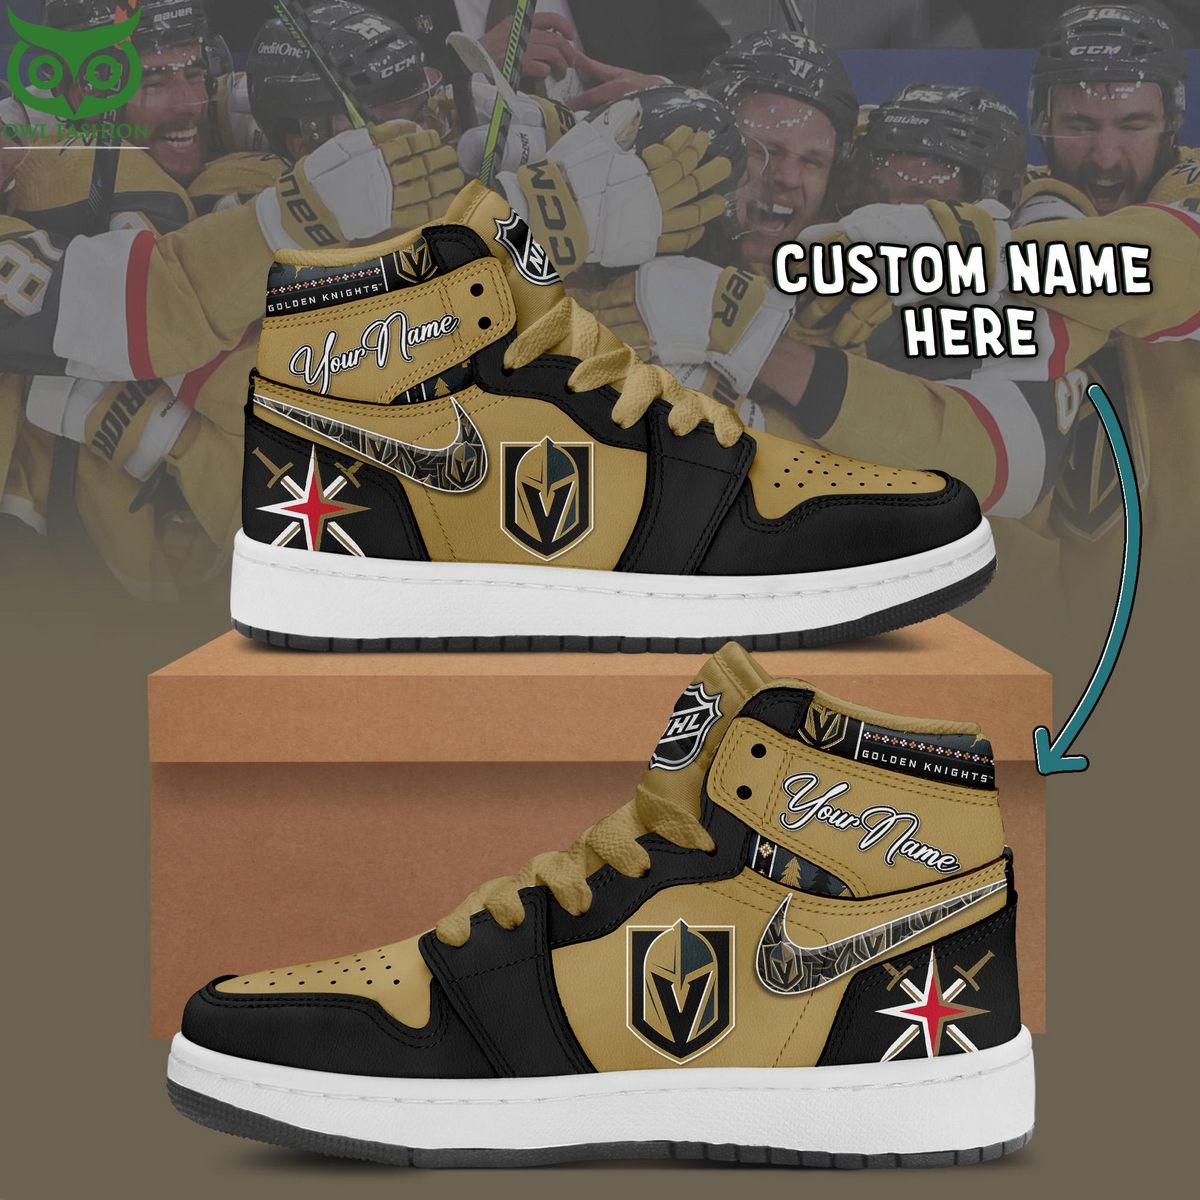 NHL Vegas Golden Knights New Released 2023 Nike Air Jordan 1 High Top Limited